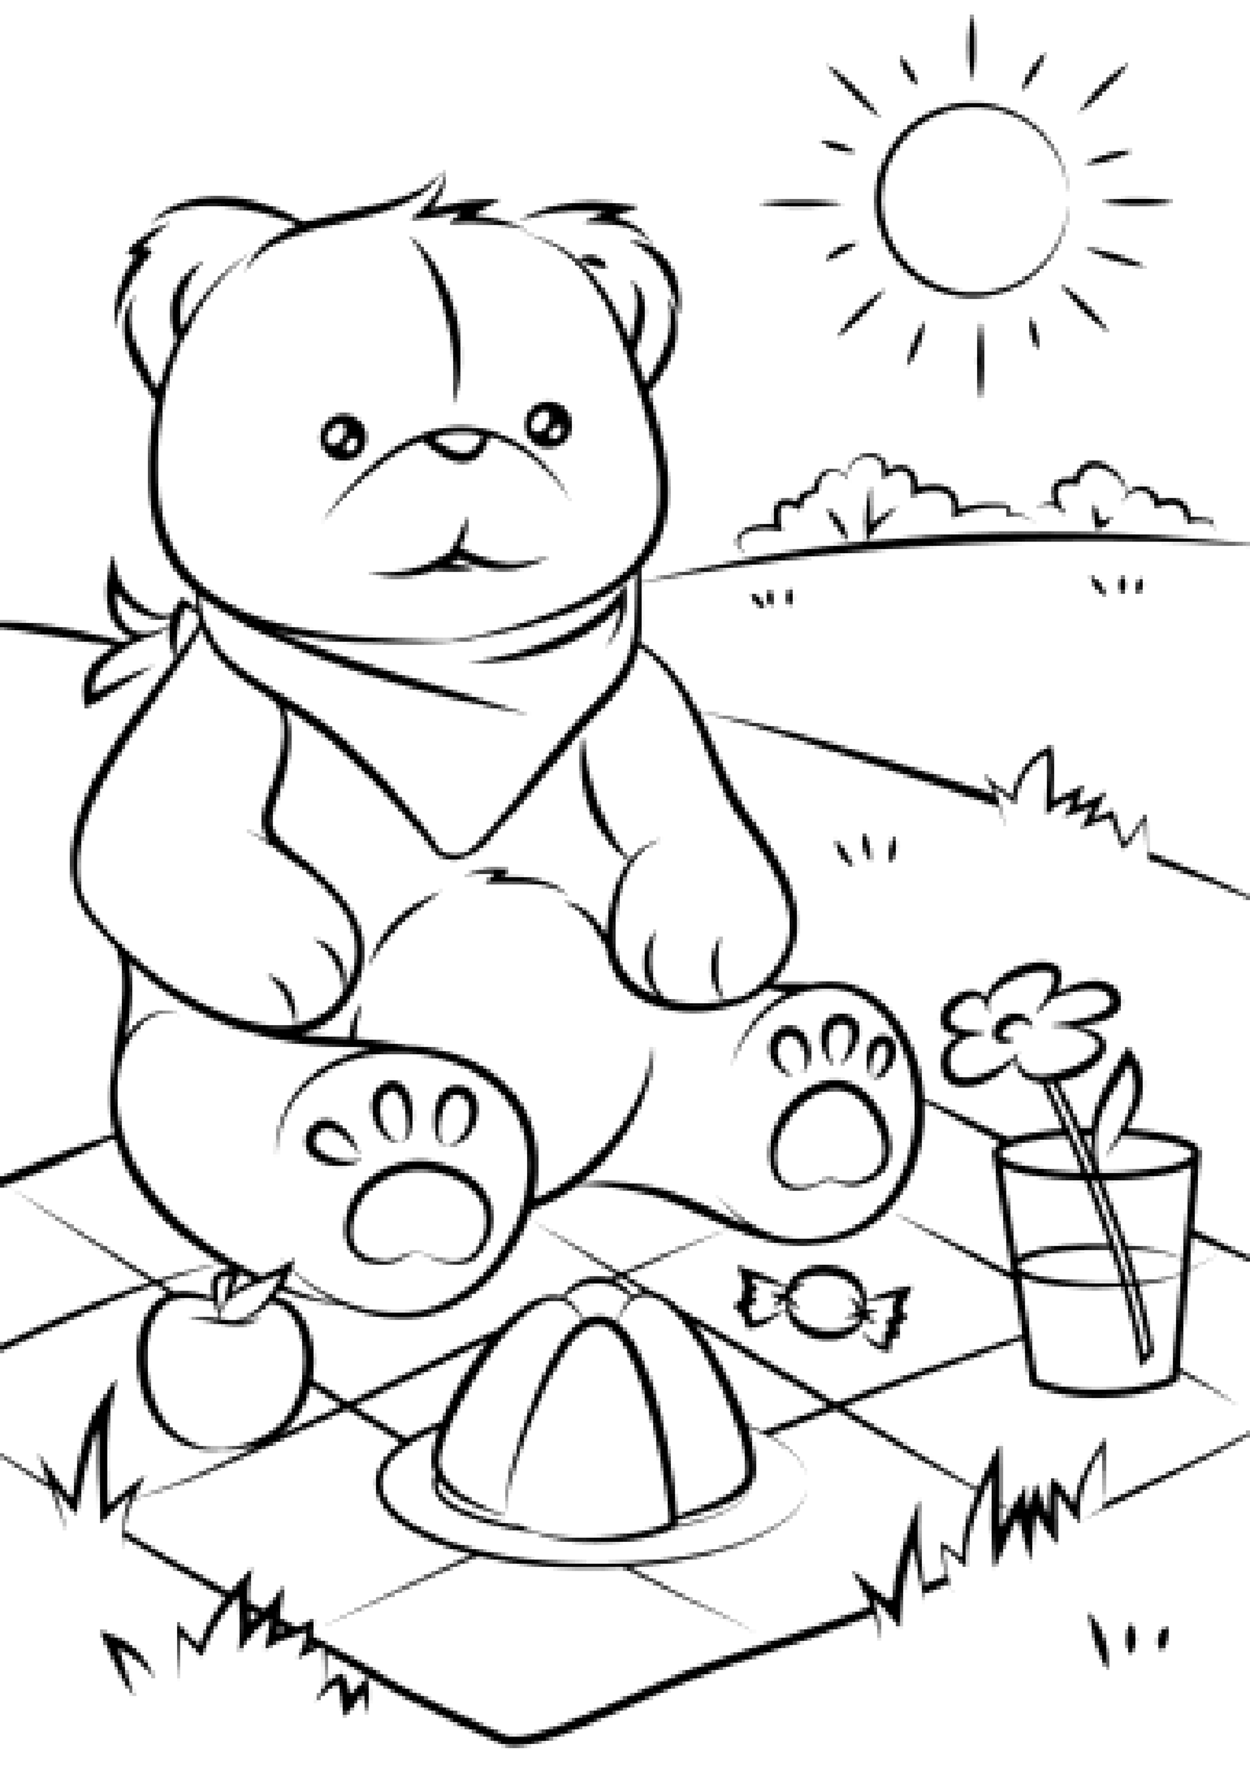 Teddy Bear Images To Color